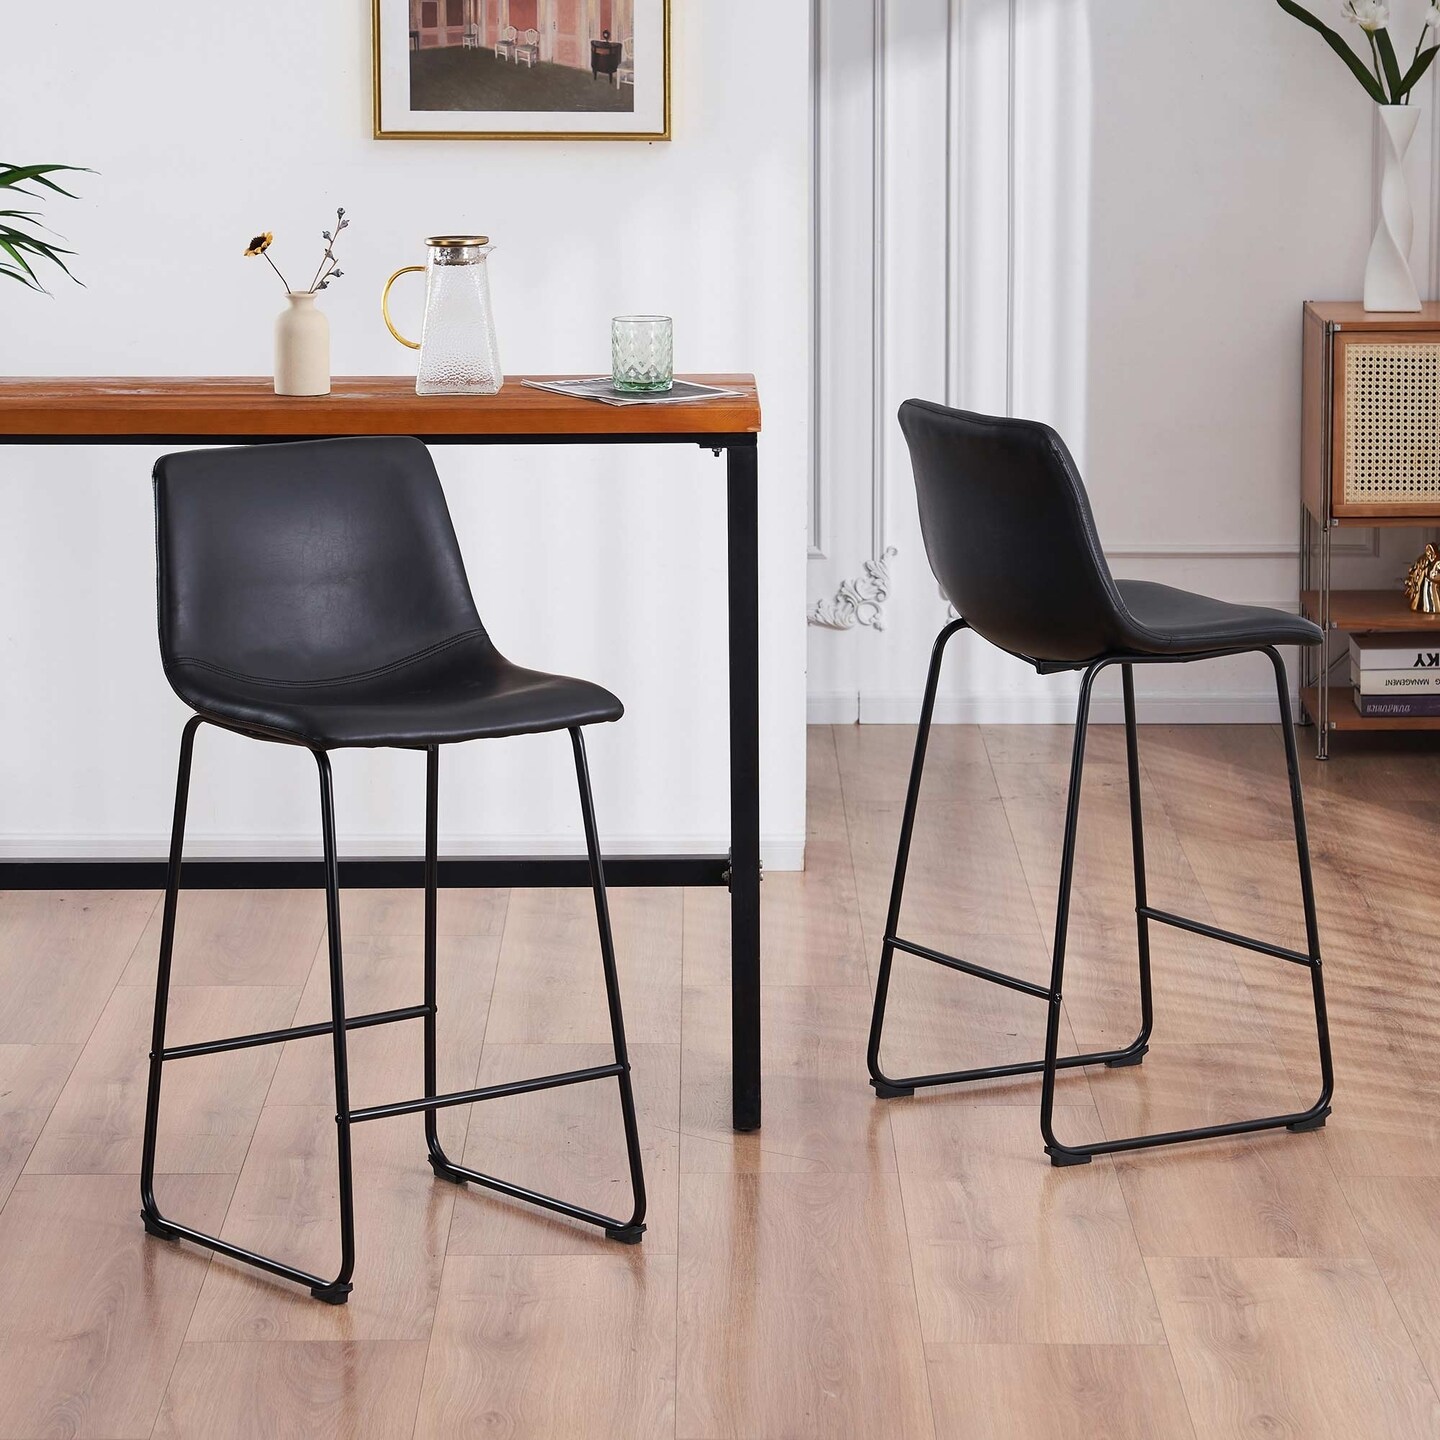 FERPIT Set of 2 Modern Upholstered Faux Leather Barstools - 26" Or 30" Counter Stool